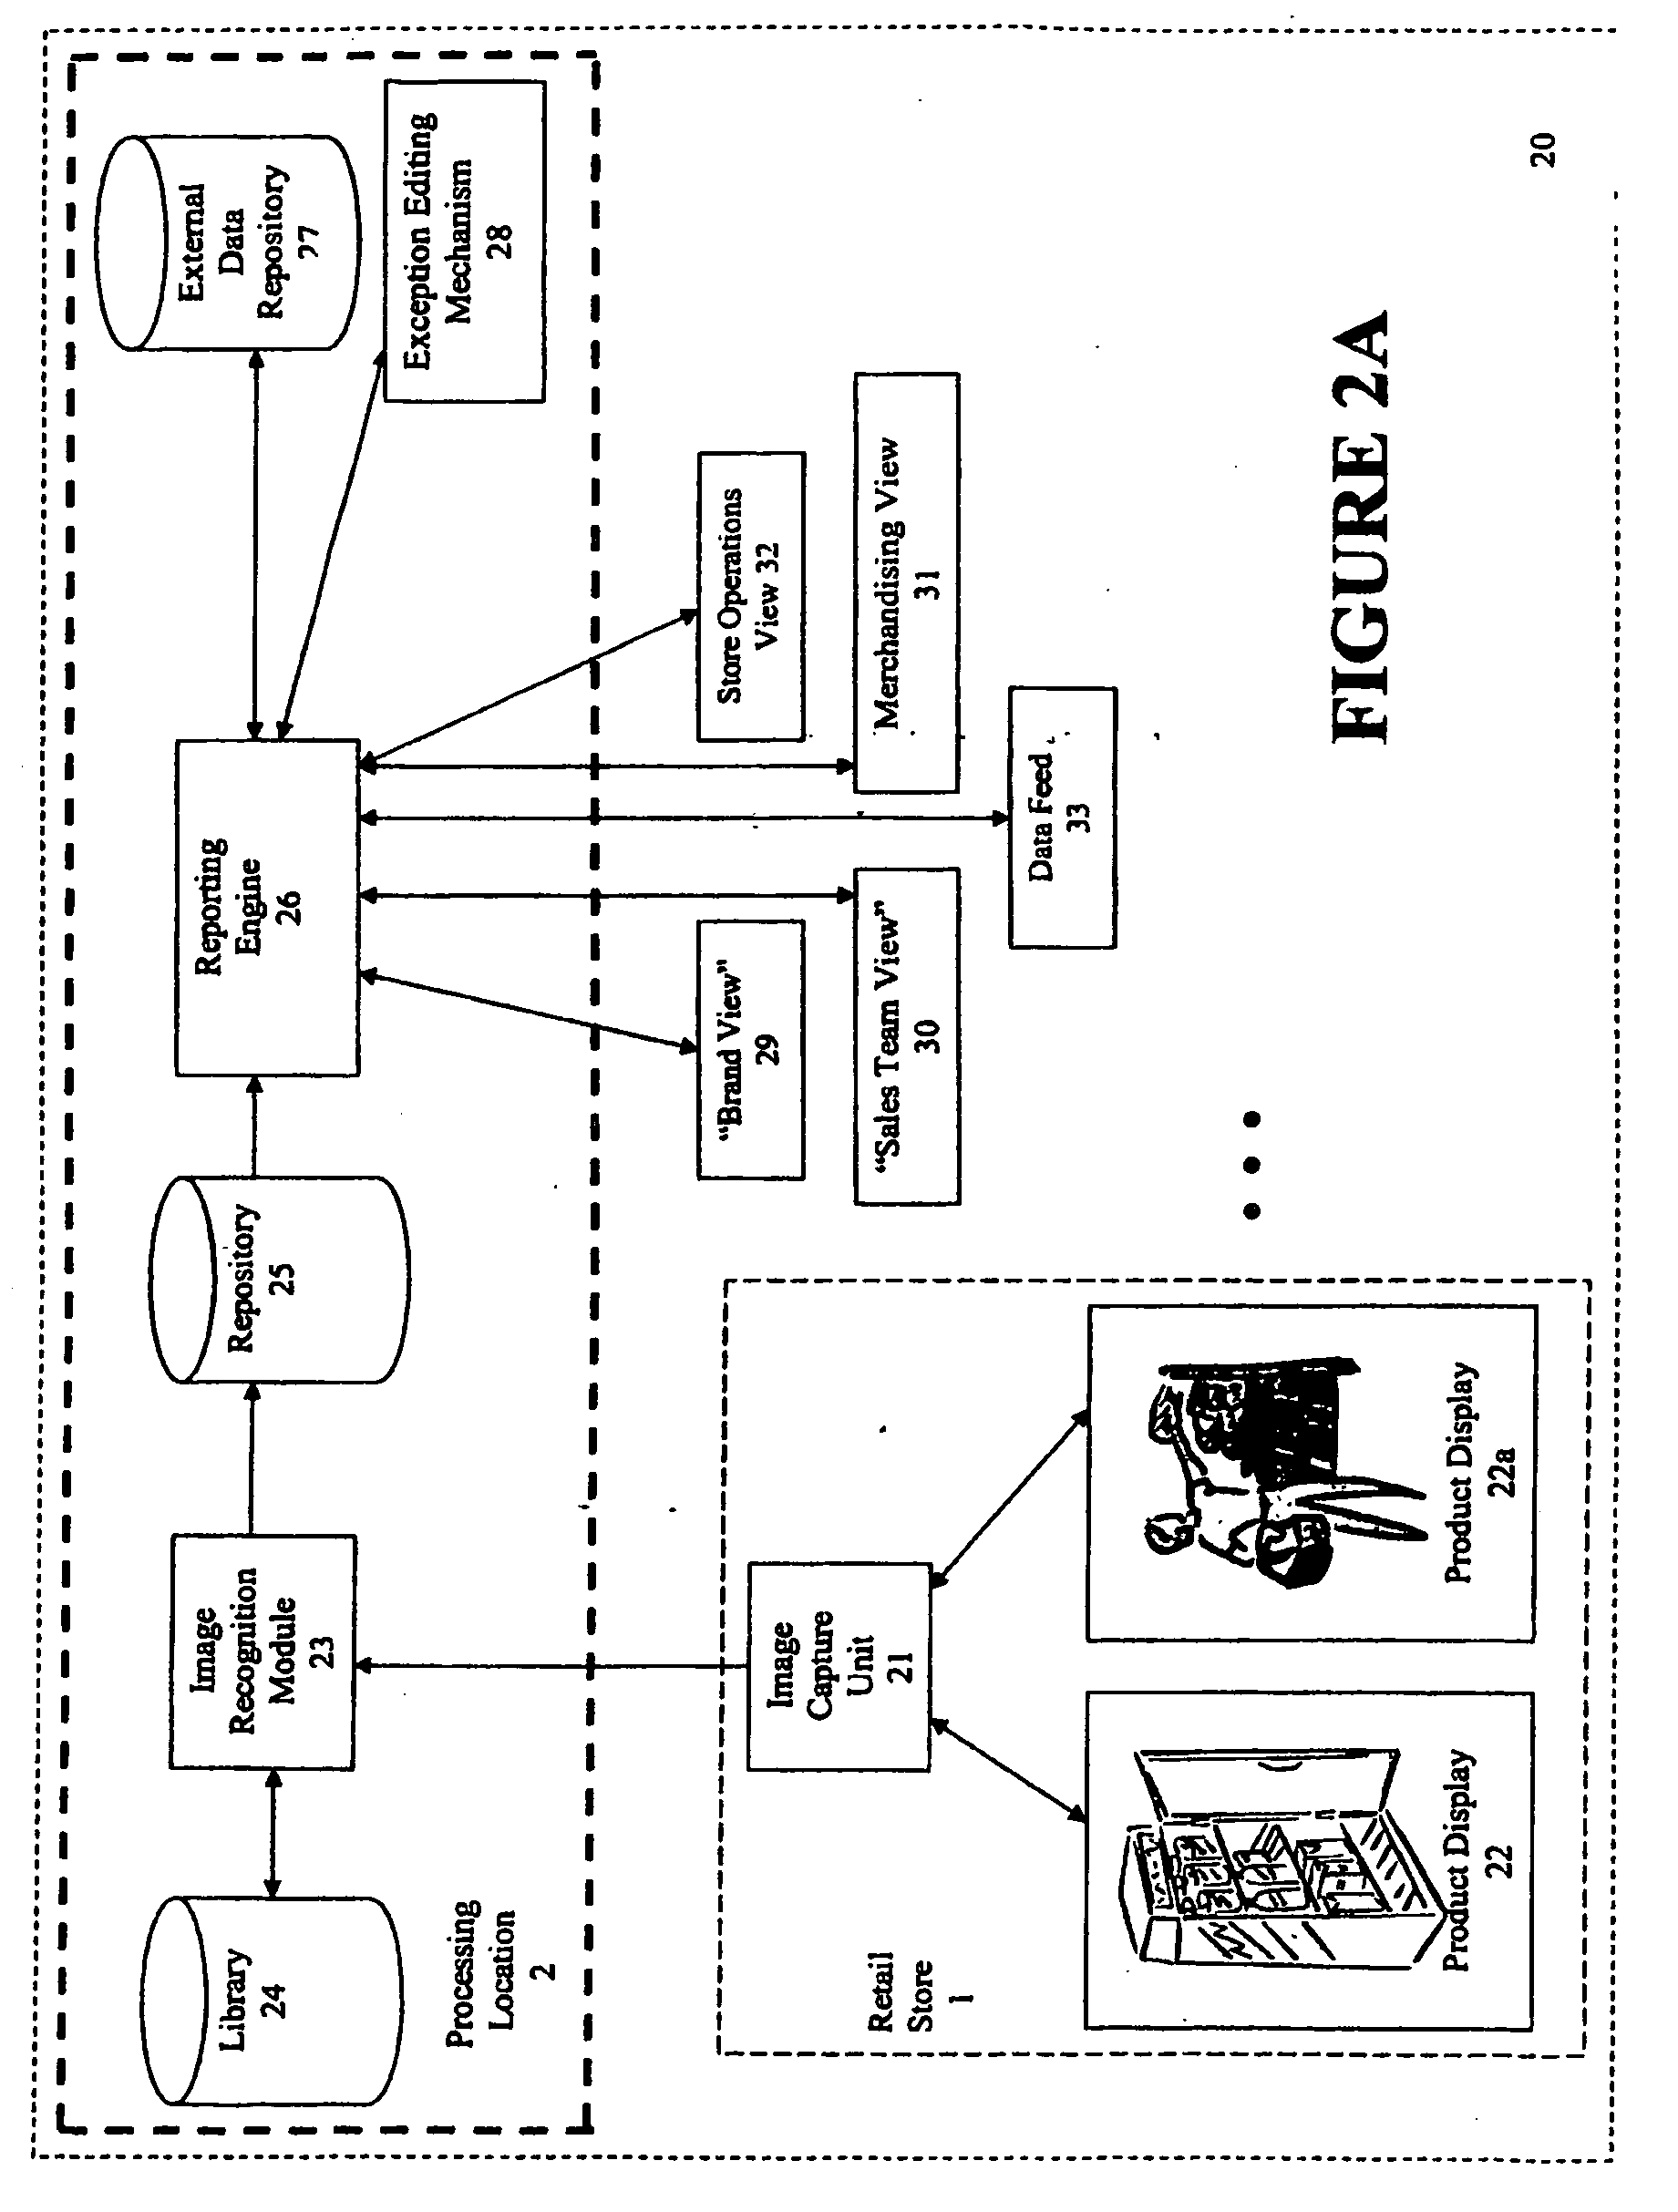 Method and System for Automatically Measuring Retail Store Display Compliance